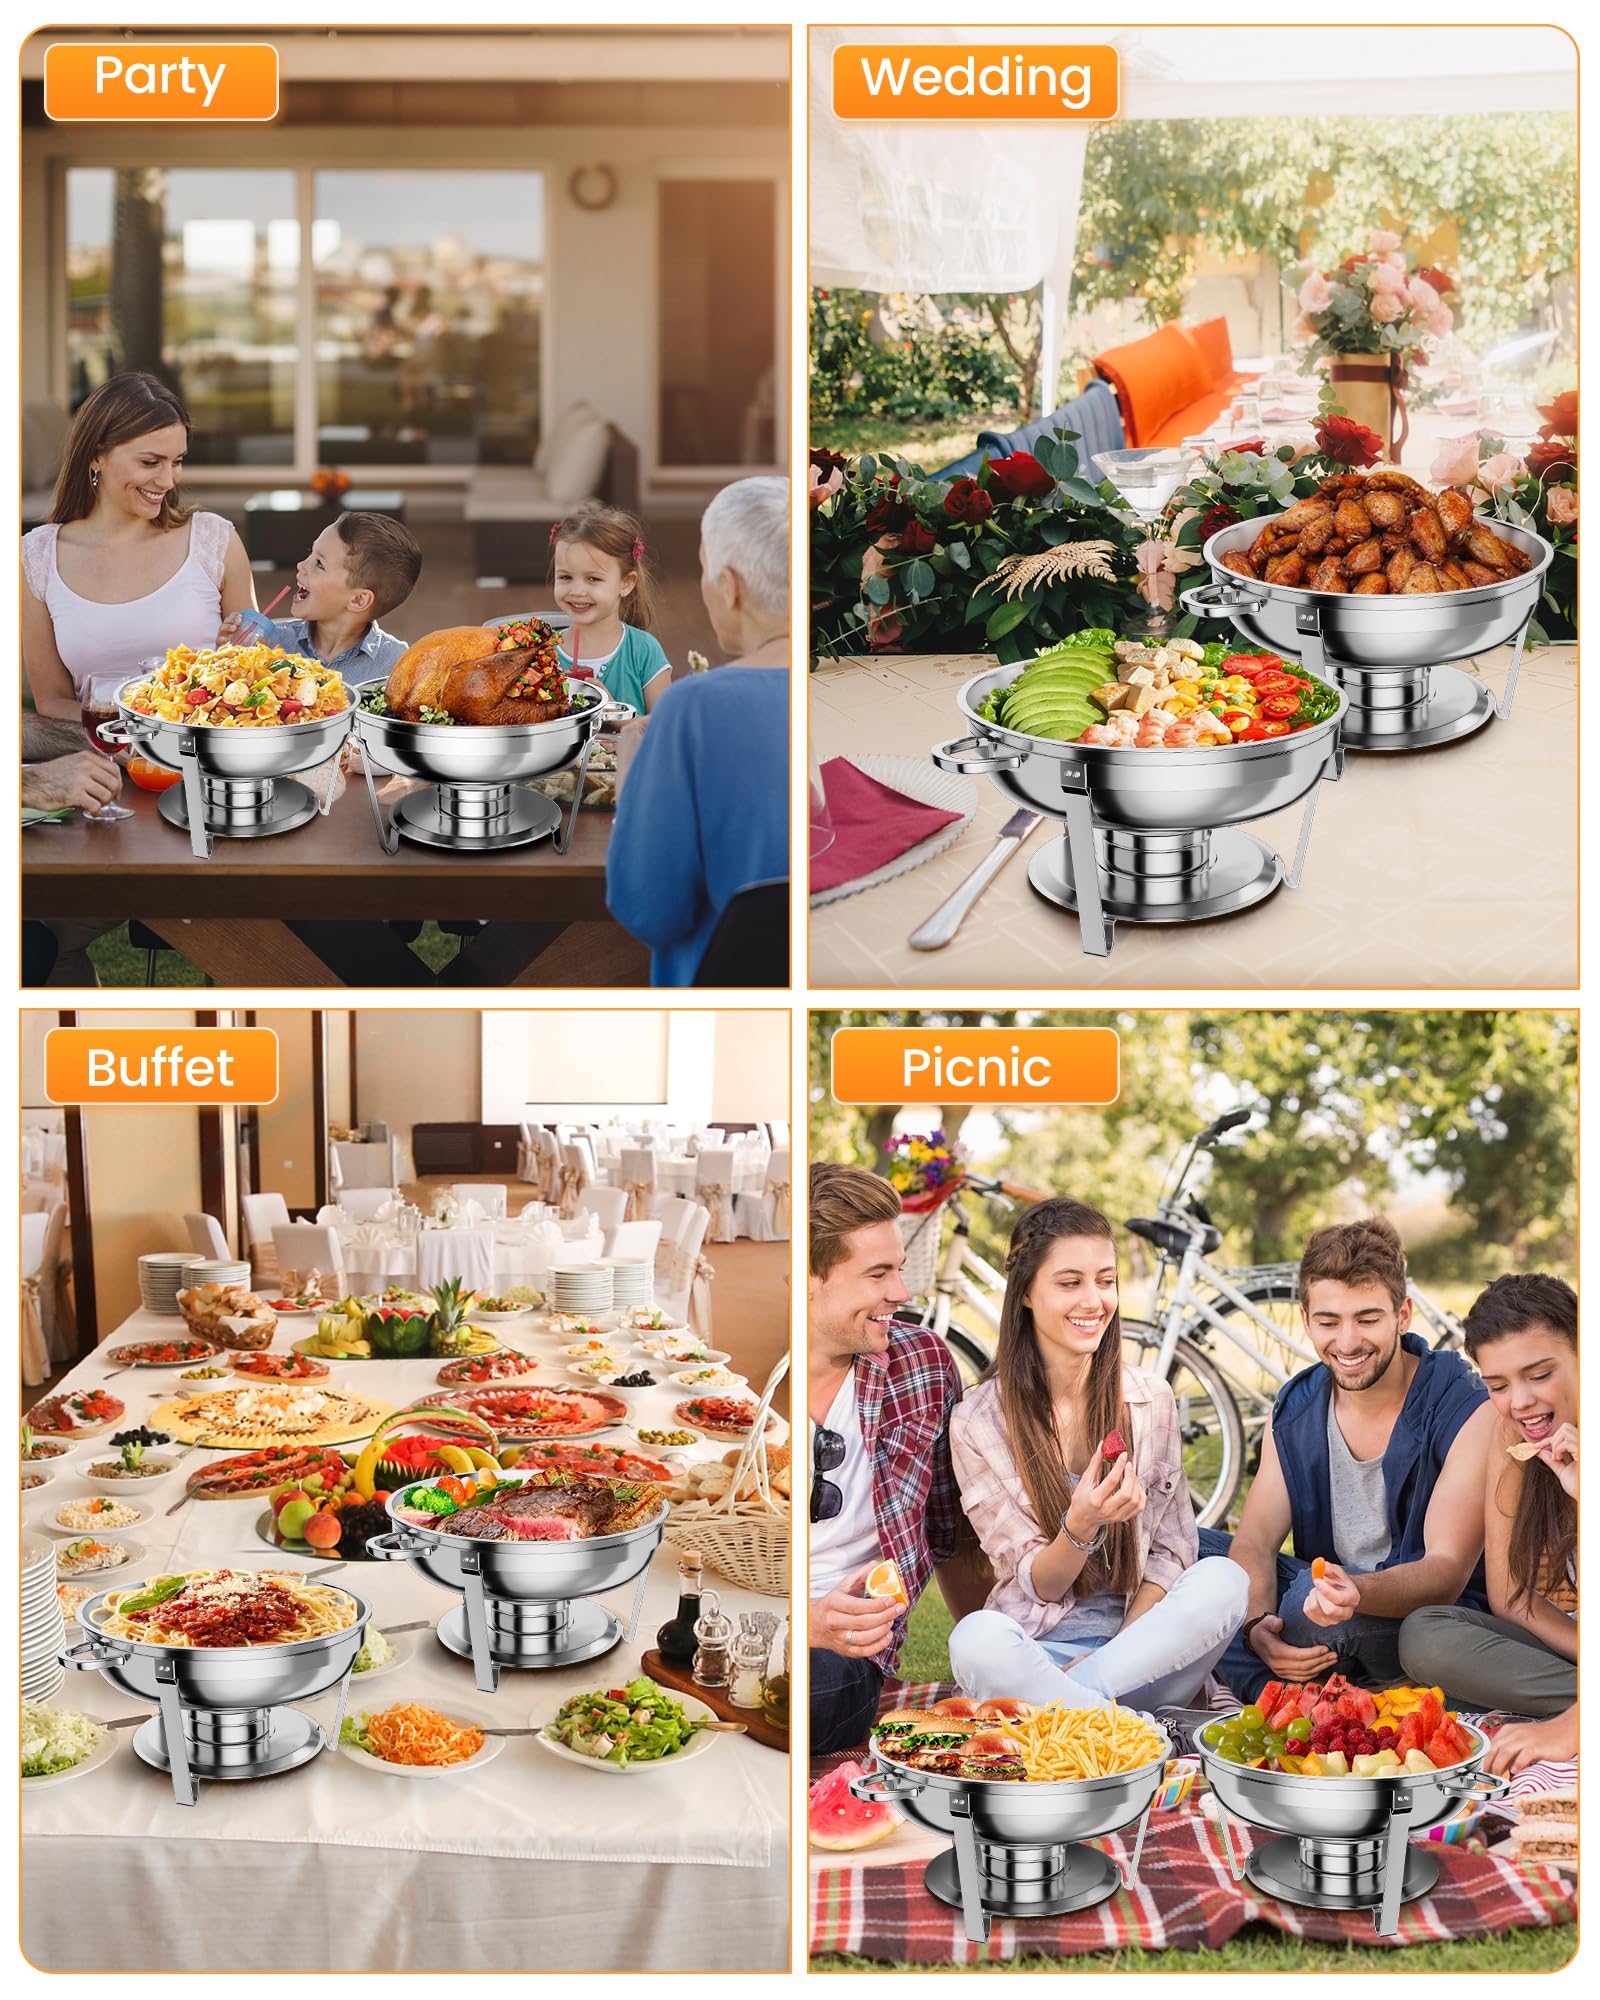 5QT Chafing Dish Buffet Set of 2 Pack, Round Stainless Steel Food Warmers Buffet Servers Sets, Chafer with Food & Water Pan, Lid, Frame, Fuel Holder for Catering and Parties